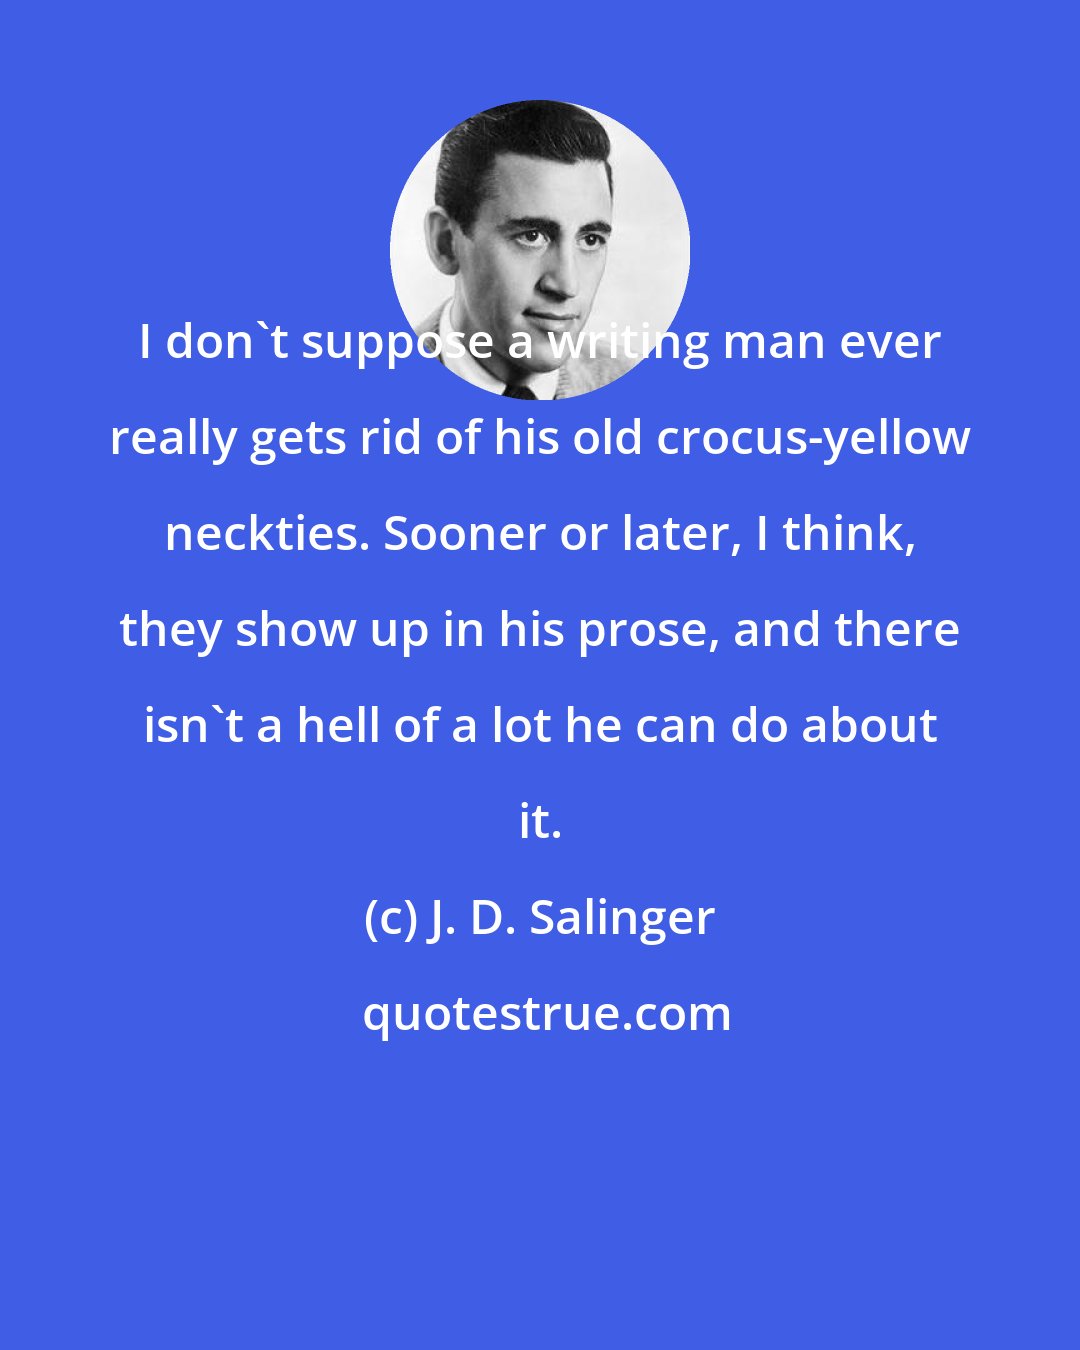 J. D. Salinger: I don't suppose a writing man ever really gets rid of his old crocus-yellow neckties. Sooner or later, I think, they show up in his prose, and there isn't a hell of a lot he can do about it.